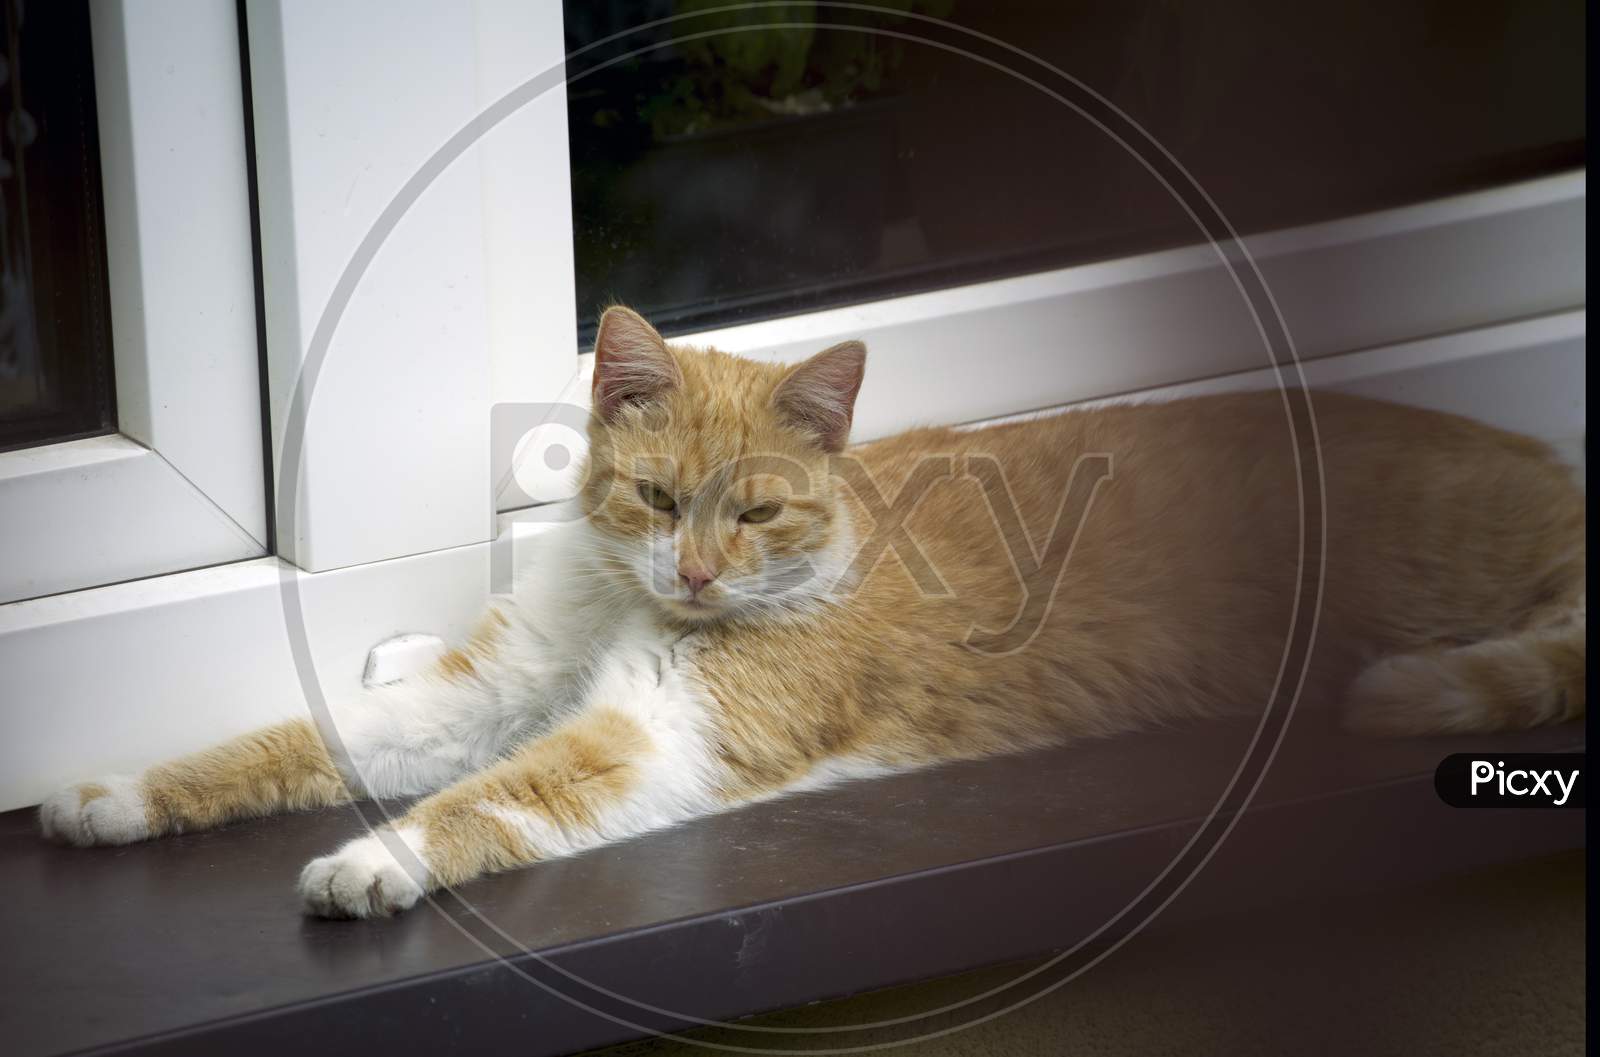 Tabby Cat, A Domestic Cat With Distintive M Shaped Marking On Its Forehead Sitting By A Window Of A House